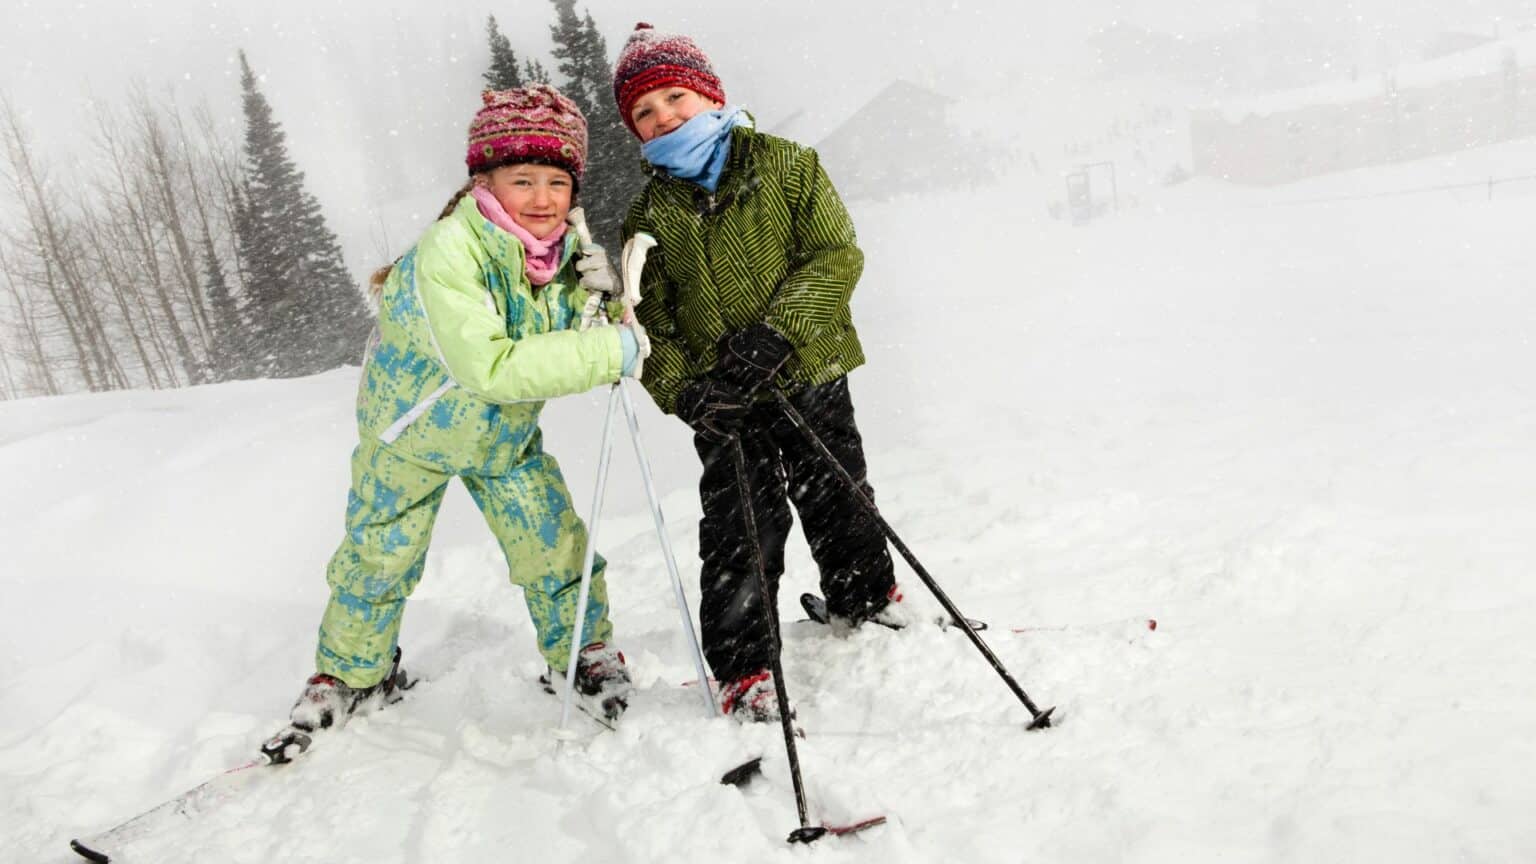 Skiing for Children At What Age and What Benefits